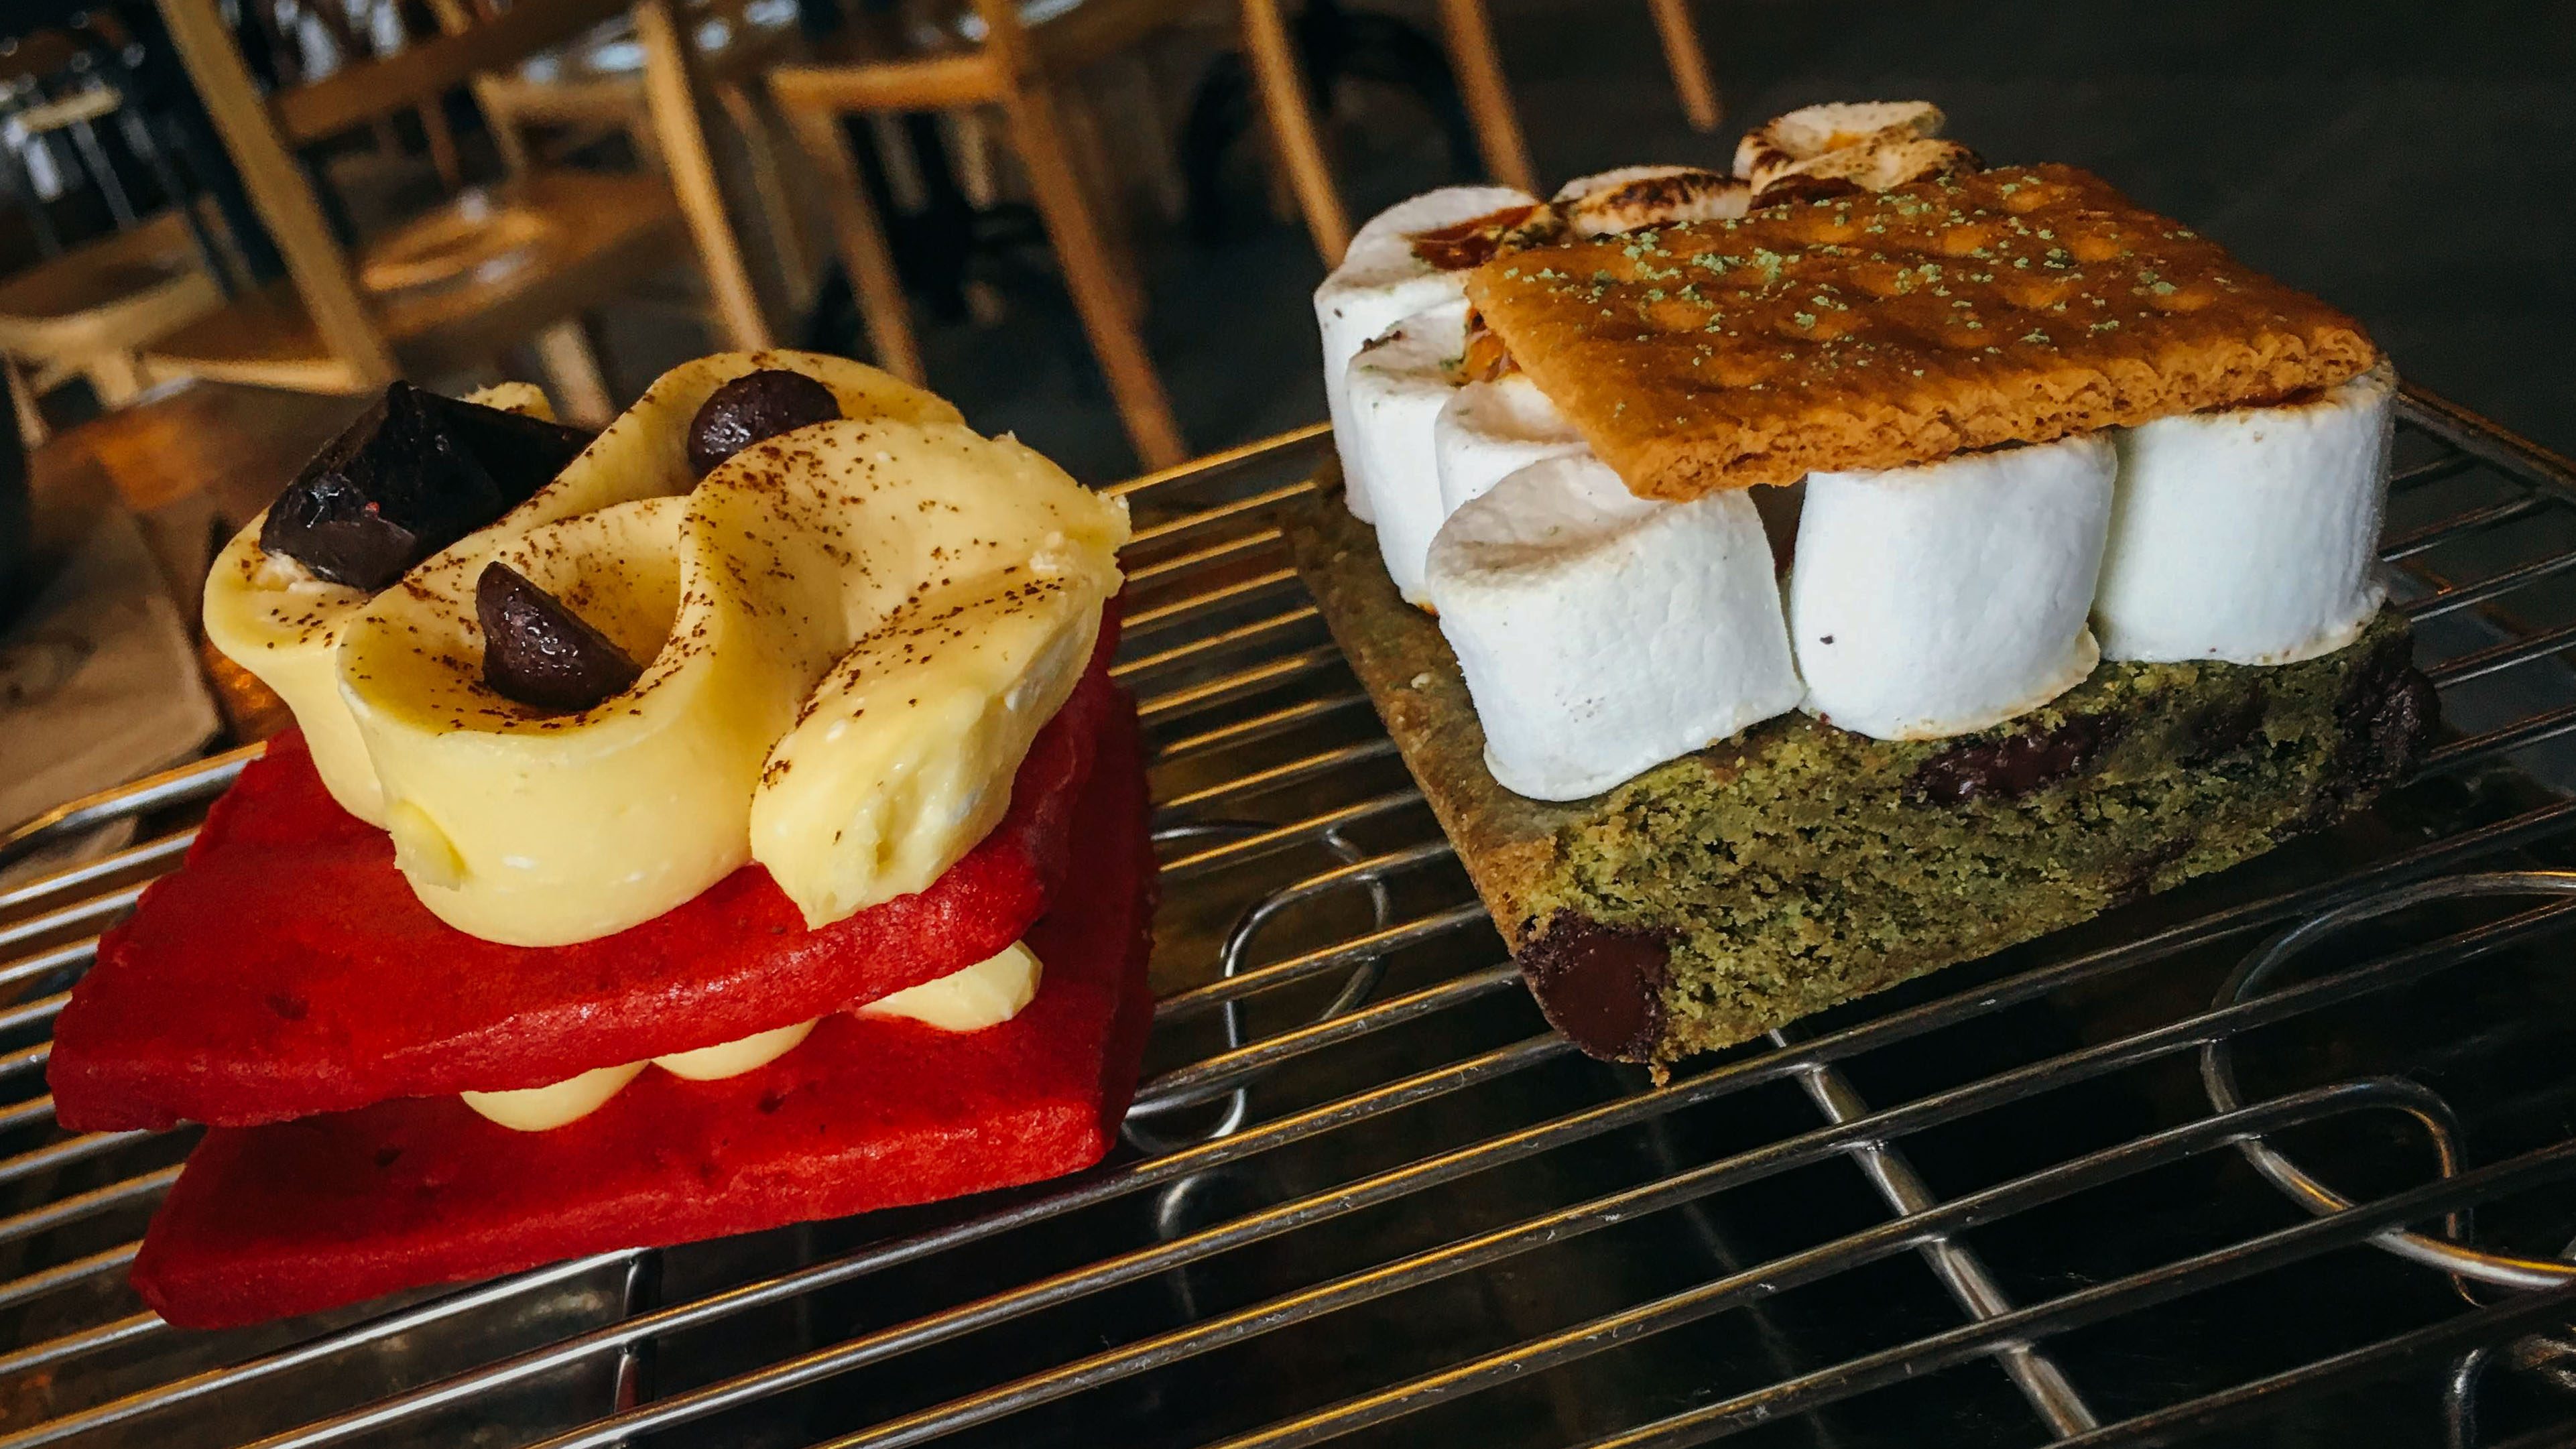 Red velvet & cream cheese and matcha & miso s'mores. Photo by Paolo Abad/Rappler 